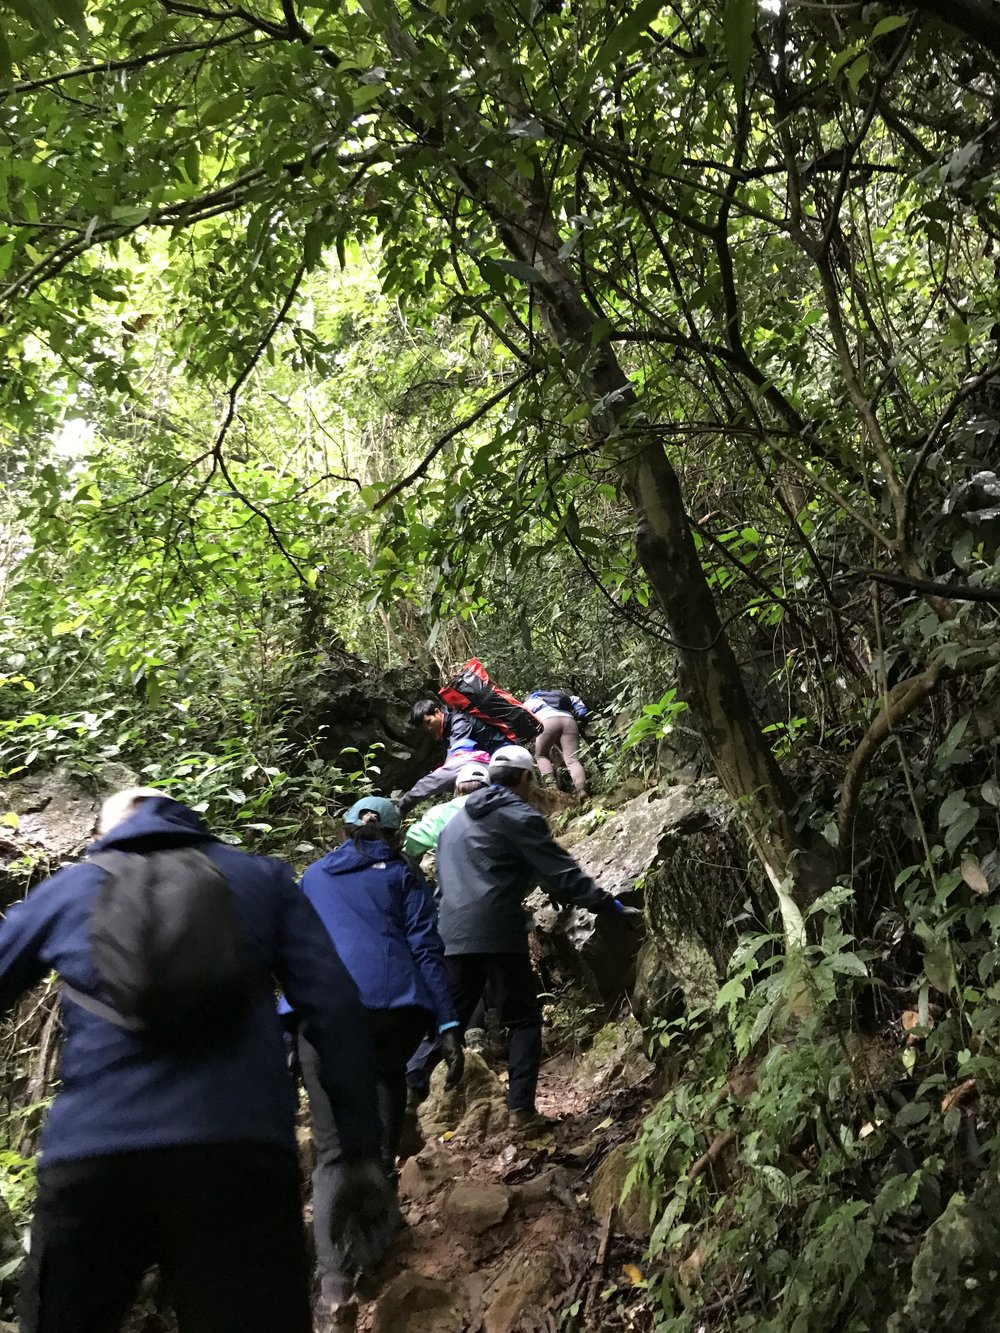 Work campers hiked "Big Rat" and "Little Rat" caves in Quang Binh